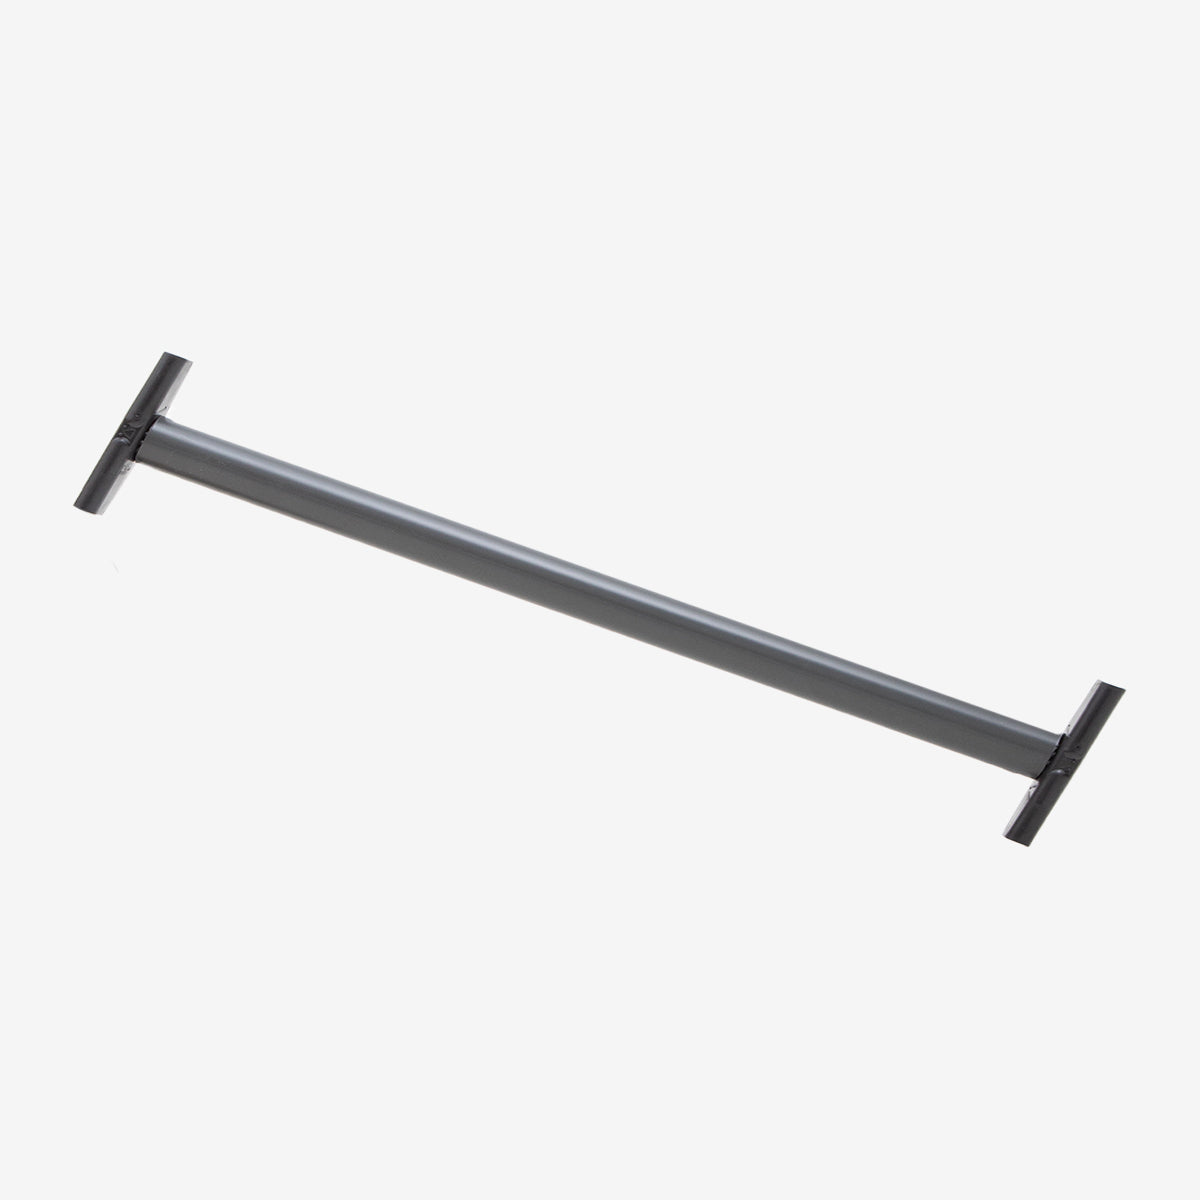 60cm rod in smooth plastic for SCT18 and SCT19 ASTA60L